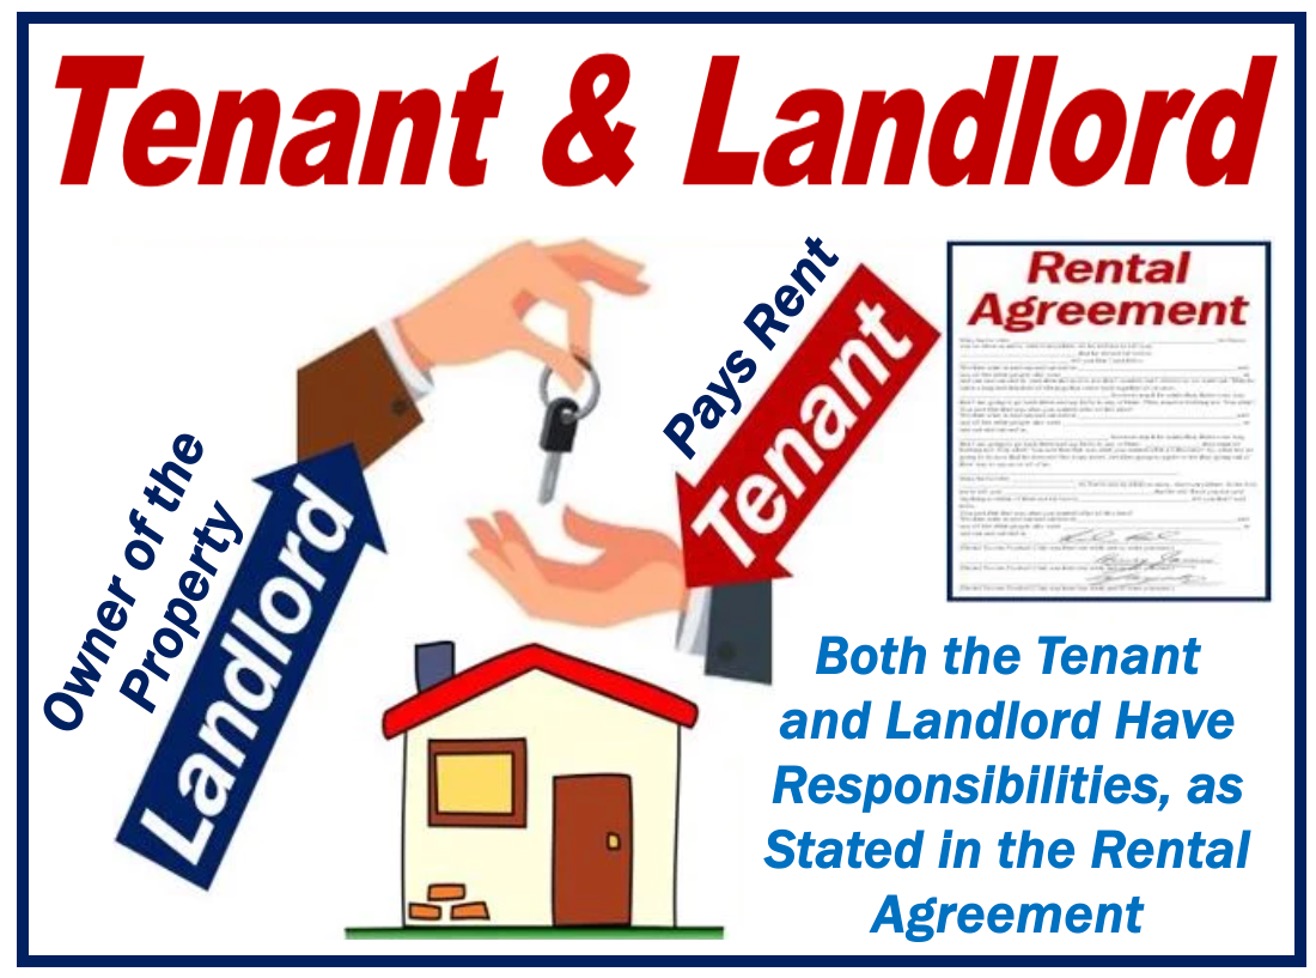 An image explaining the meanings of tenant and landlord